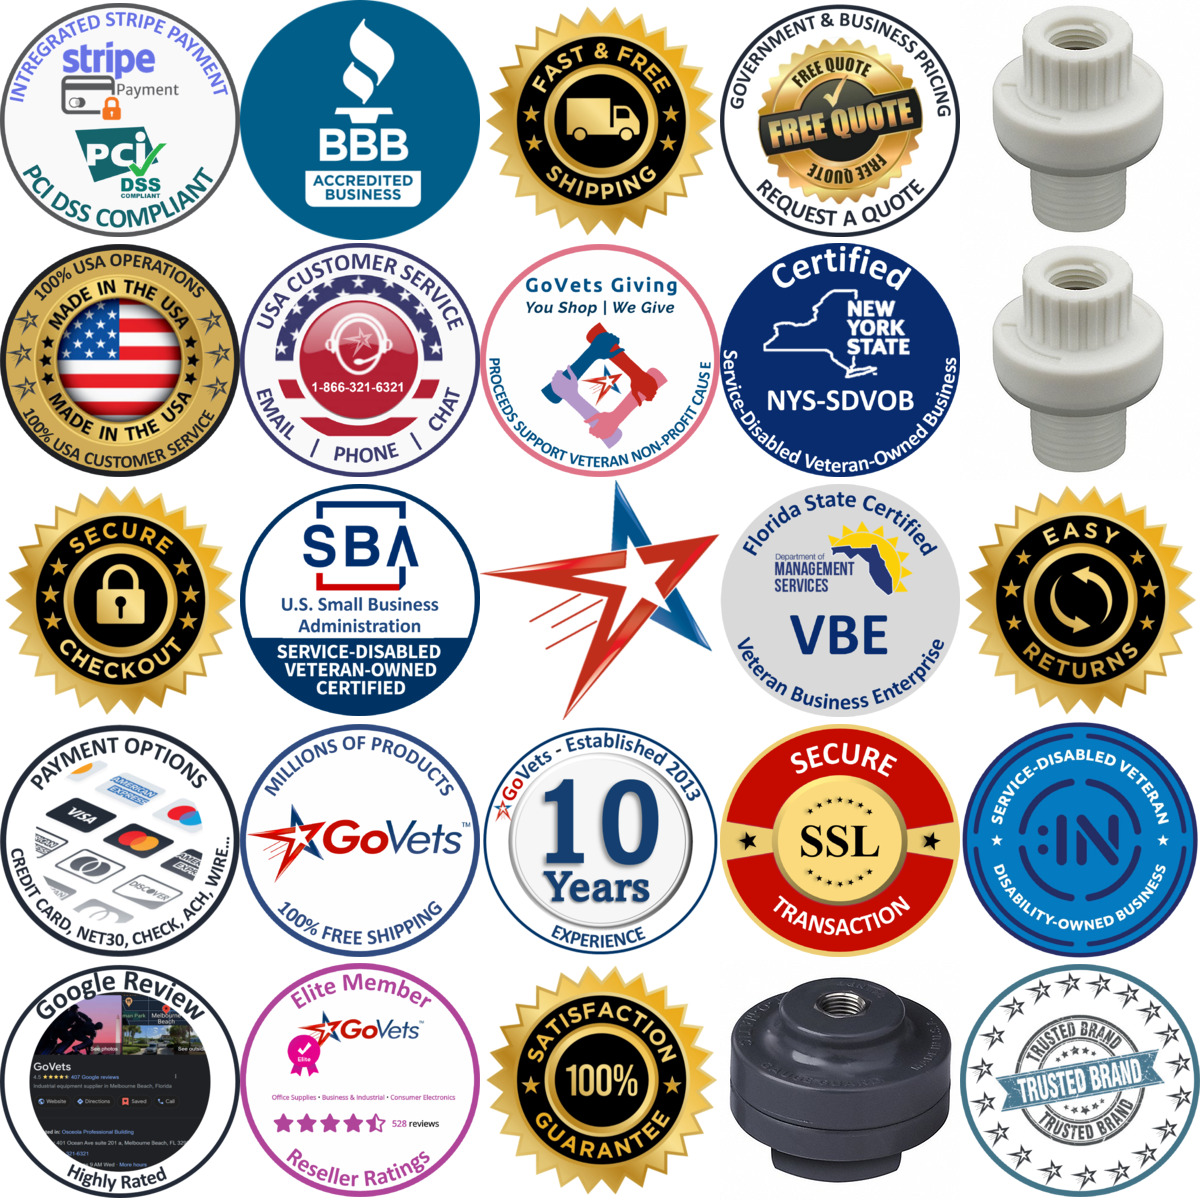 A selection of Pressure Gauge Guards products on GoVets